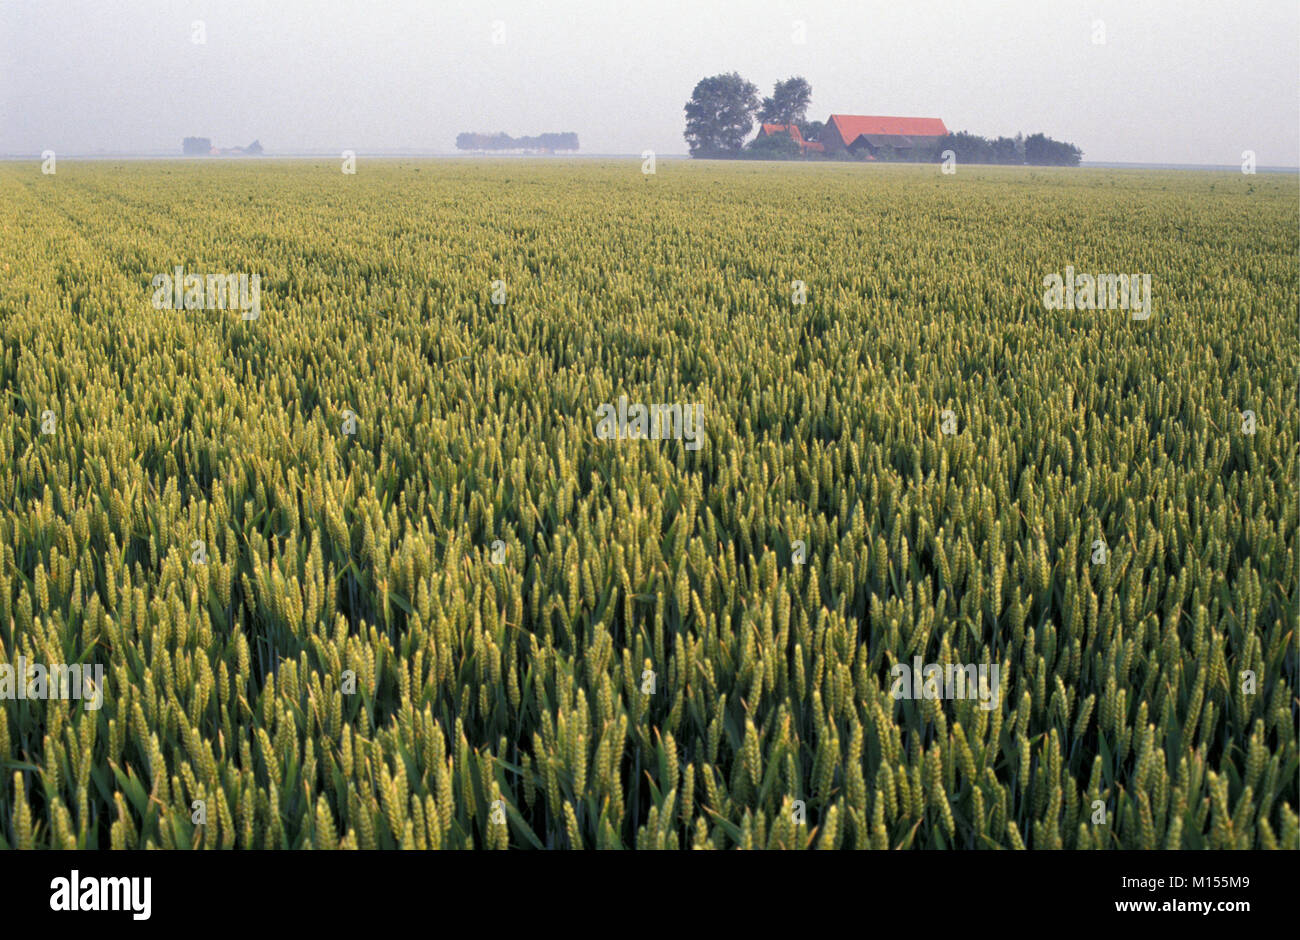 The Netherlands. Oud-Sabbinge. Agriculture. Barley field. Stock Photo